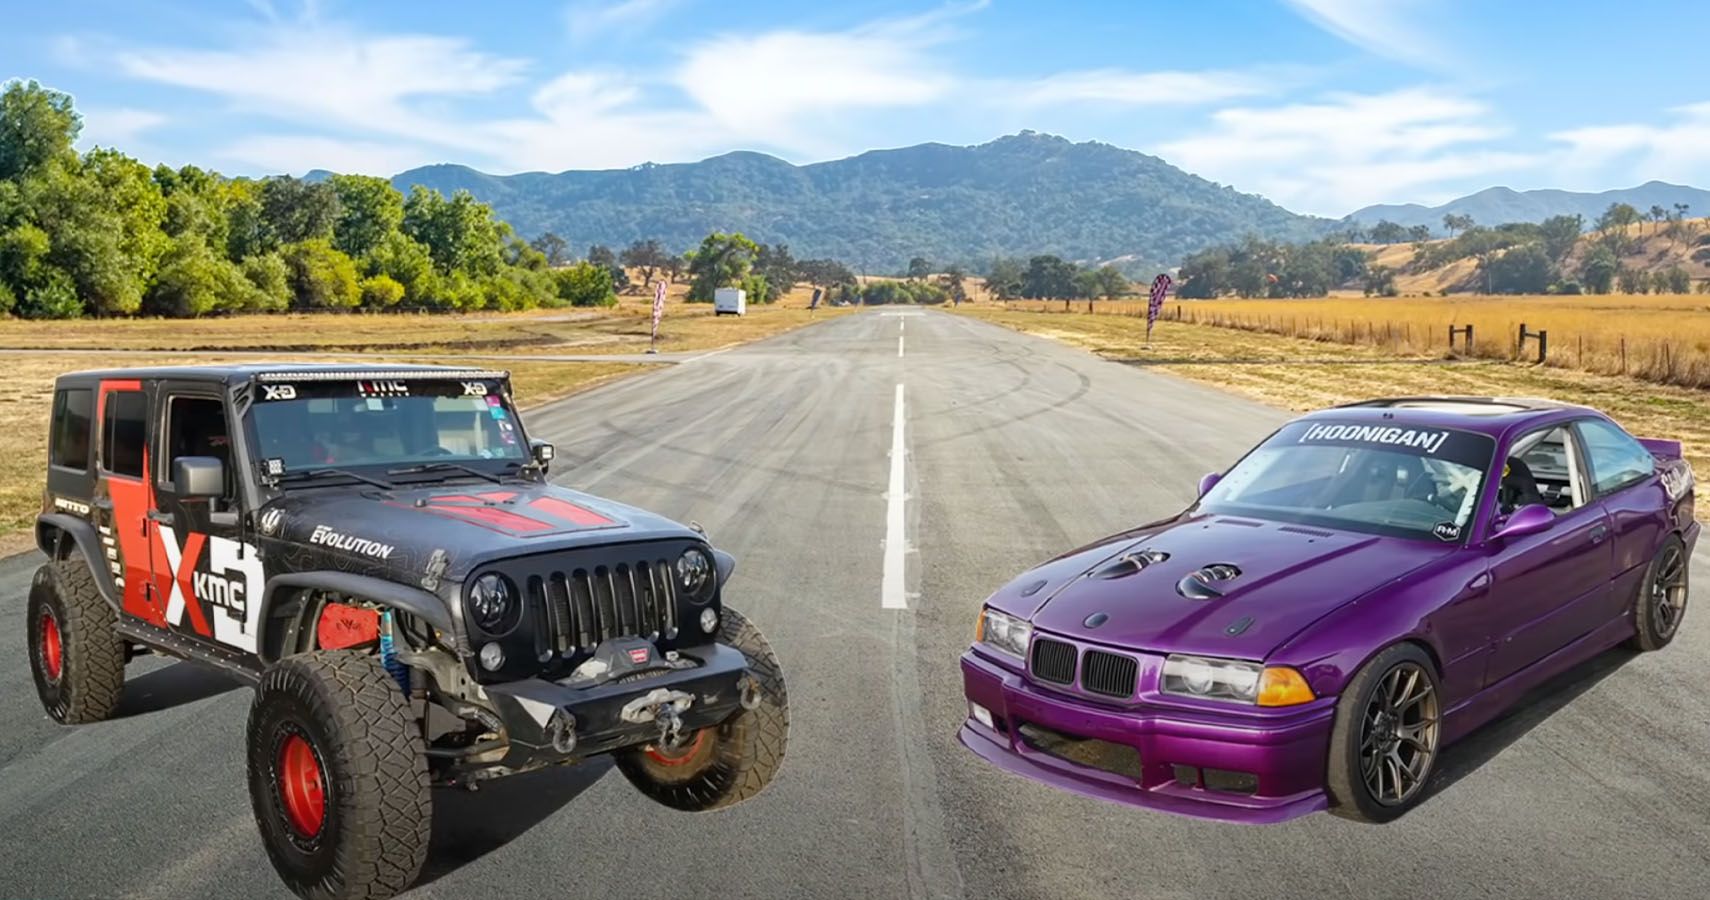 Watch A Hemi-Swapped Jeep Wrangler Race The Hoonigan's LS-Swapped BMW M3